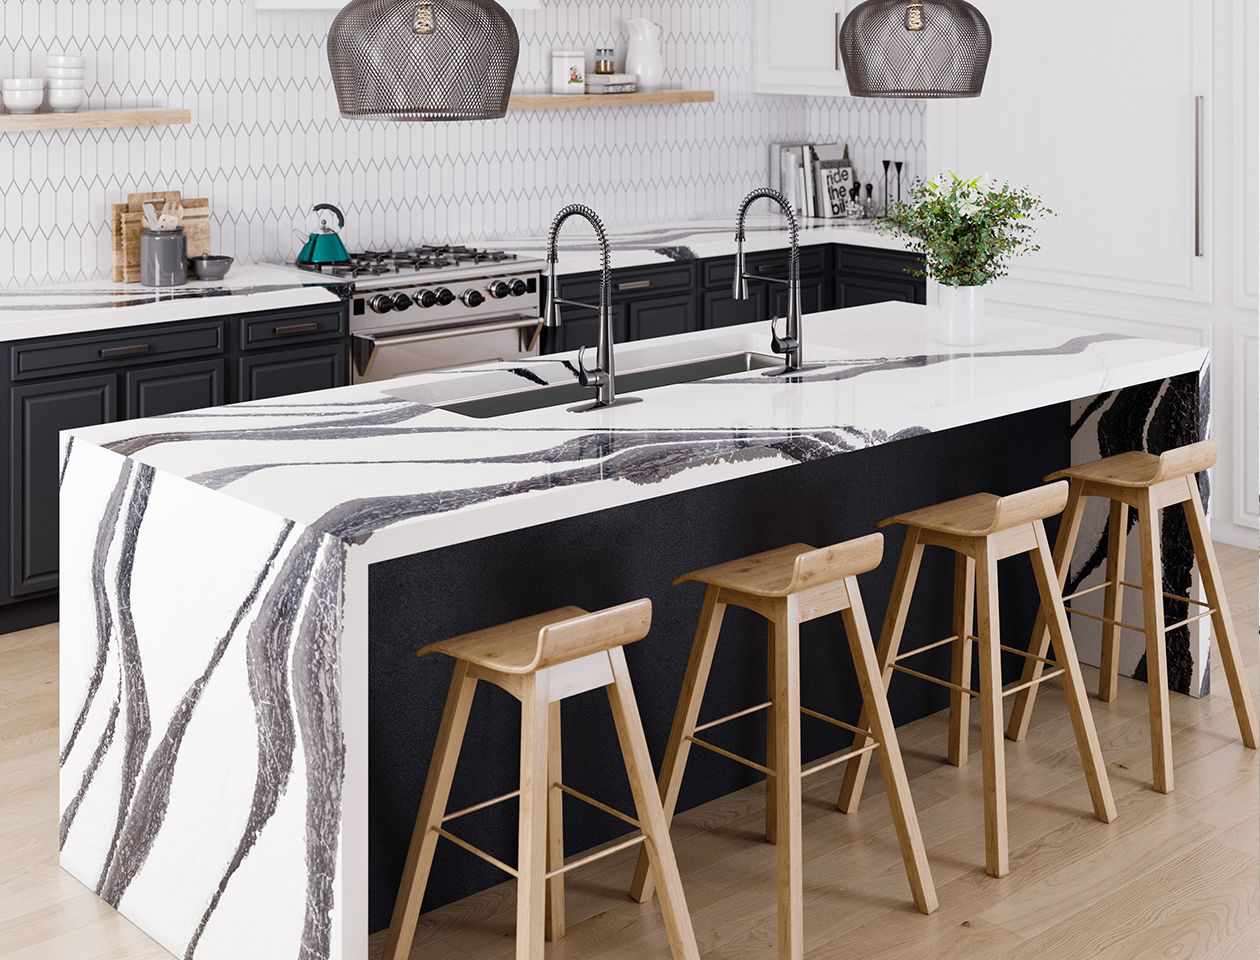 Kitchen Countertop Inspiration for Your Next Remodel   Real Simple